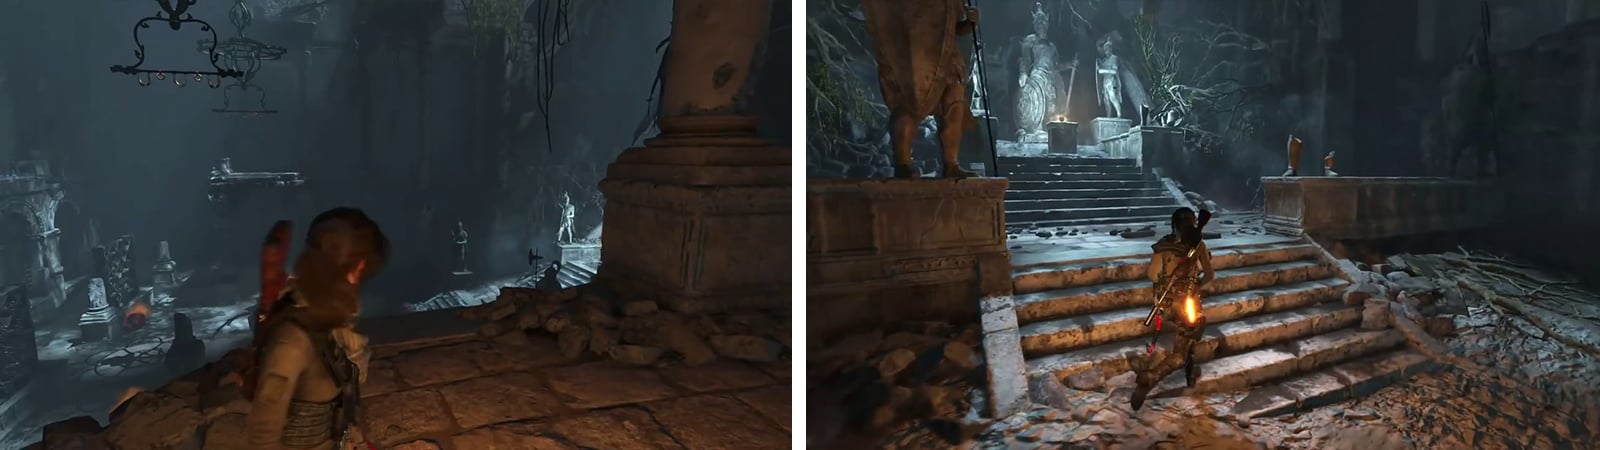 Rising Tide - The Flooded Archives - Walkthrough, Rise of the Tomb Raider  (2015)